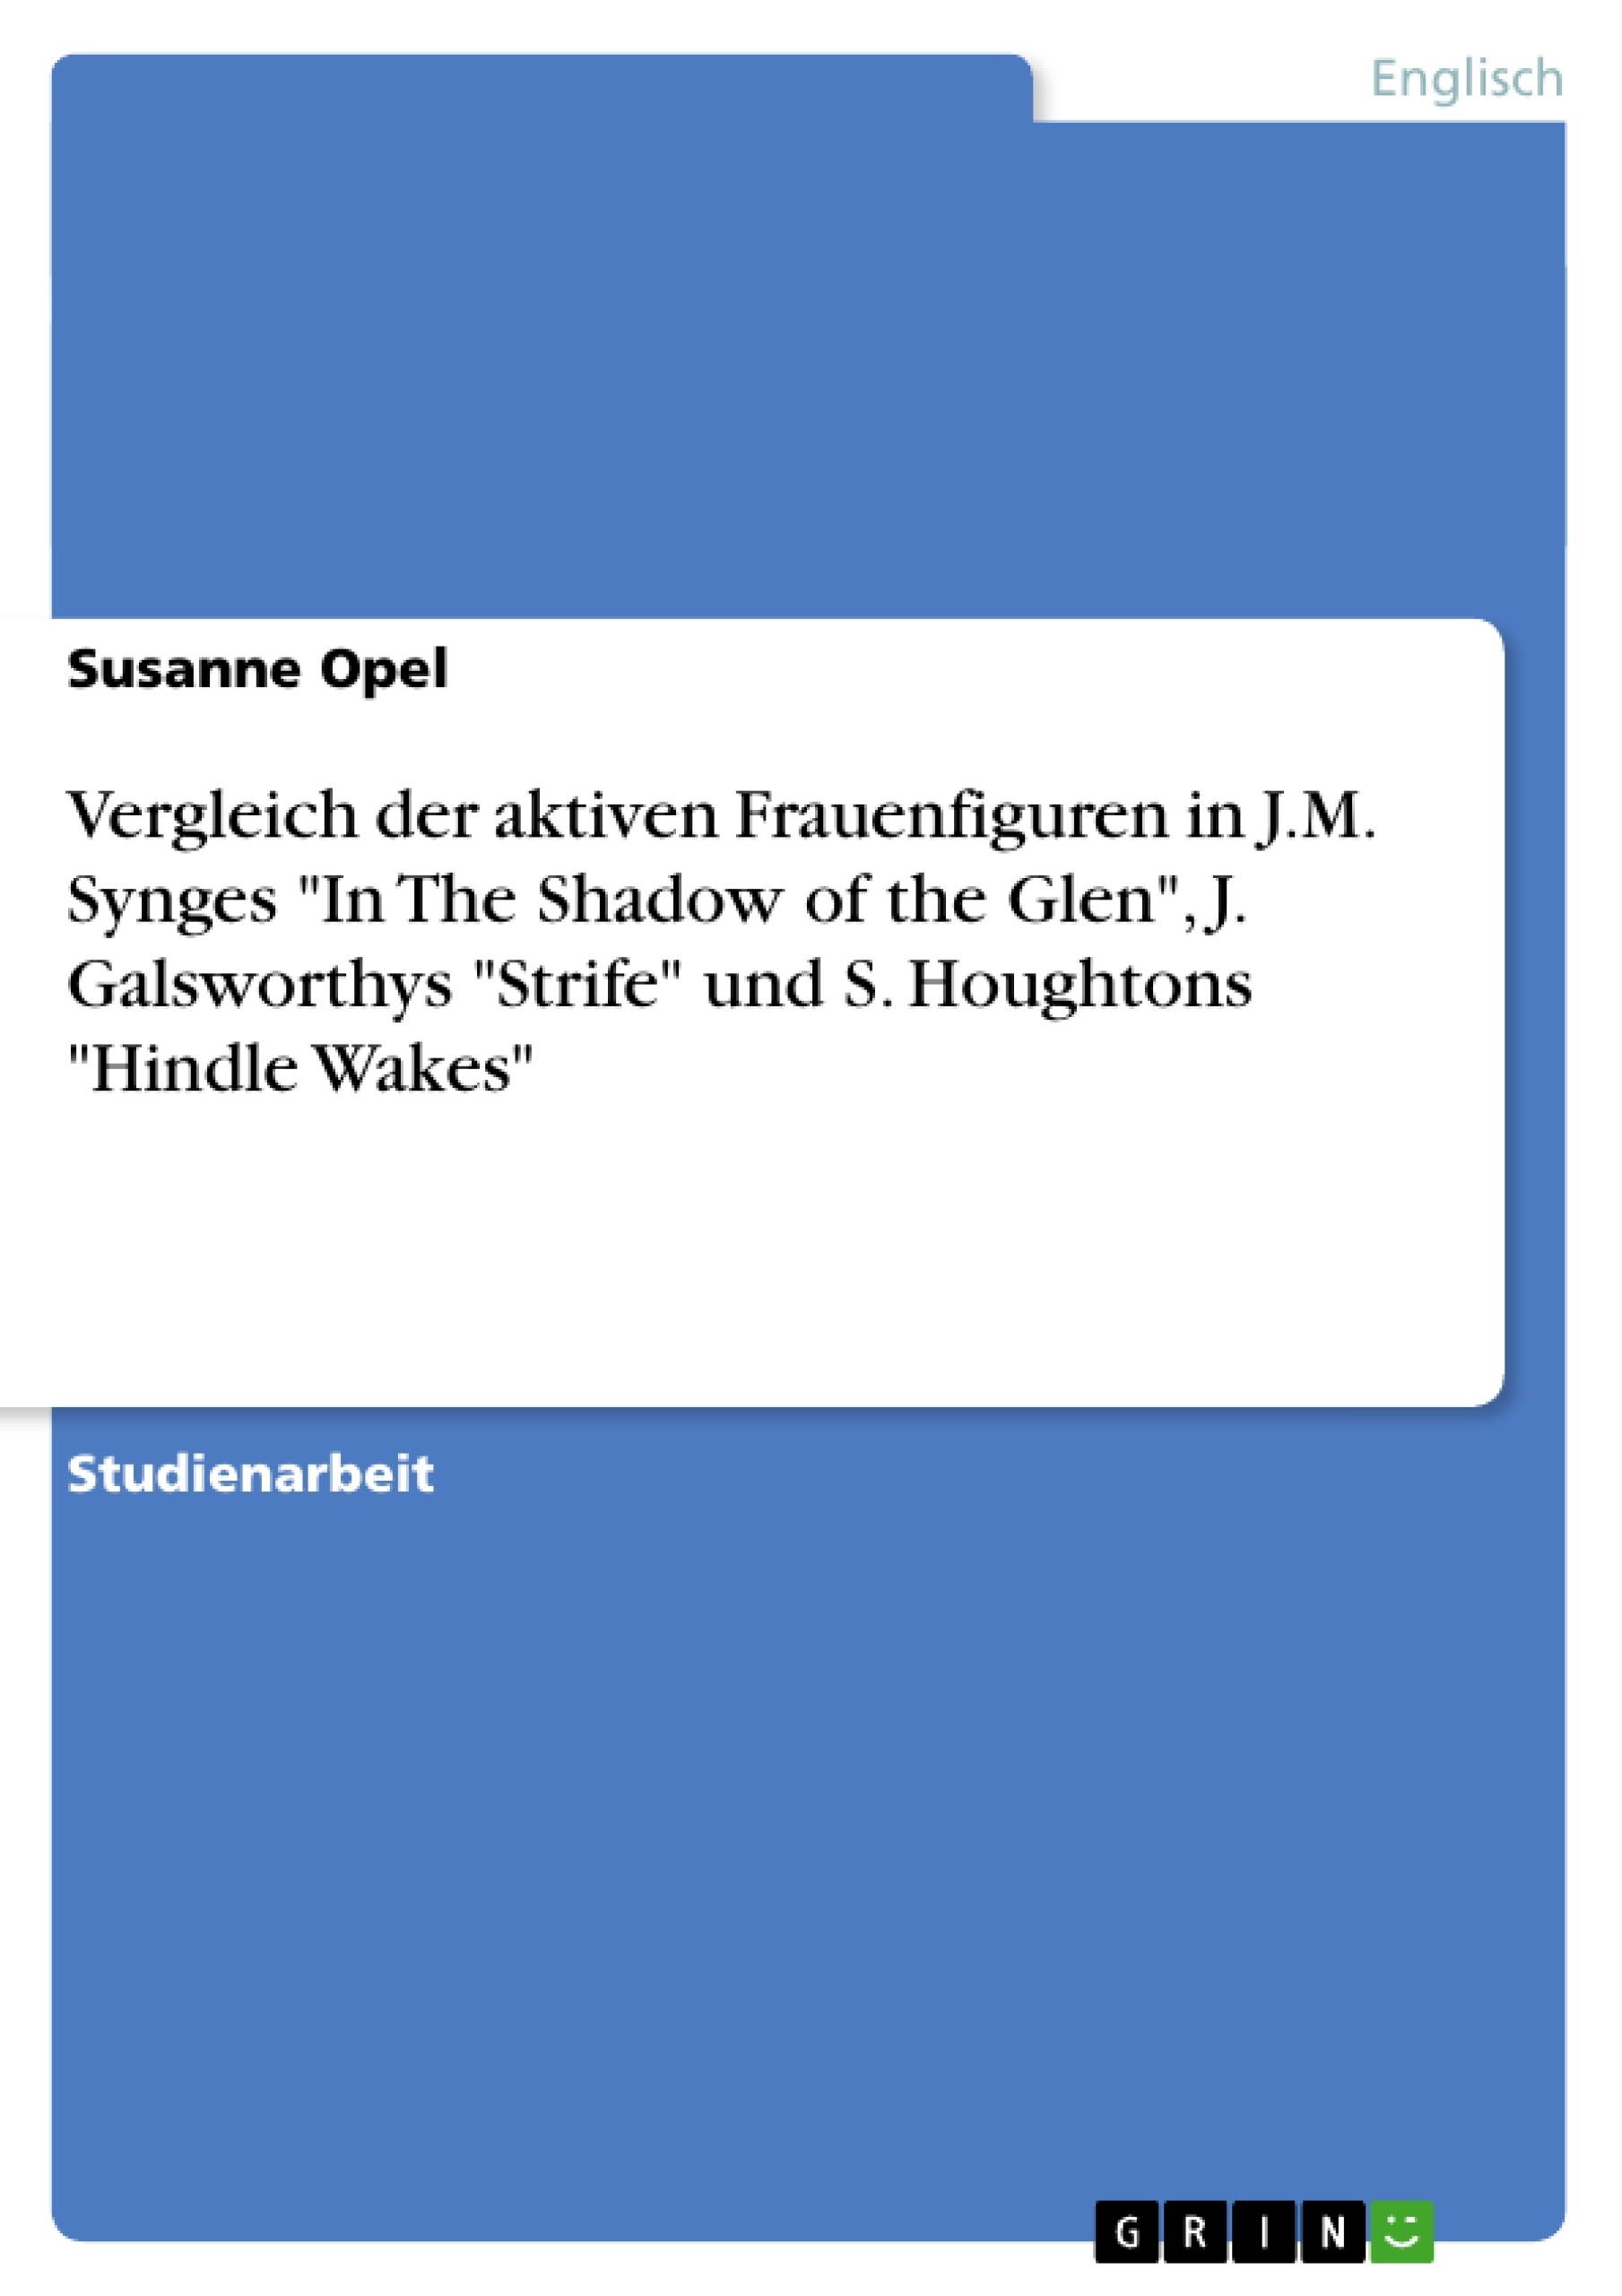 Título: Vergleich der aktiven Frauenfiguren in J.M. Synges "In The Shadow of the Glen", J. Galsworthys "Strife" und S. Houghtons "Hindle Wakes"